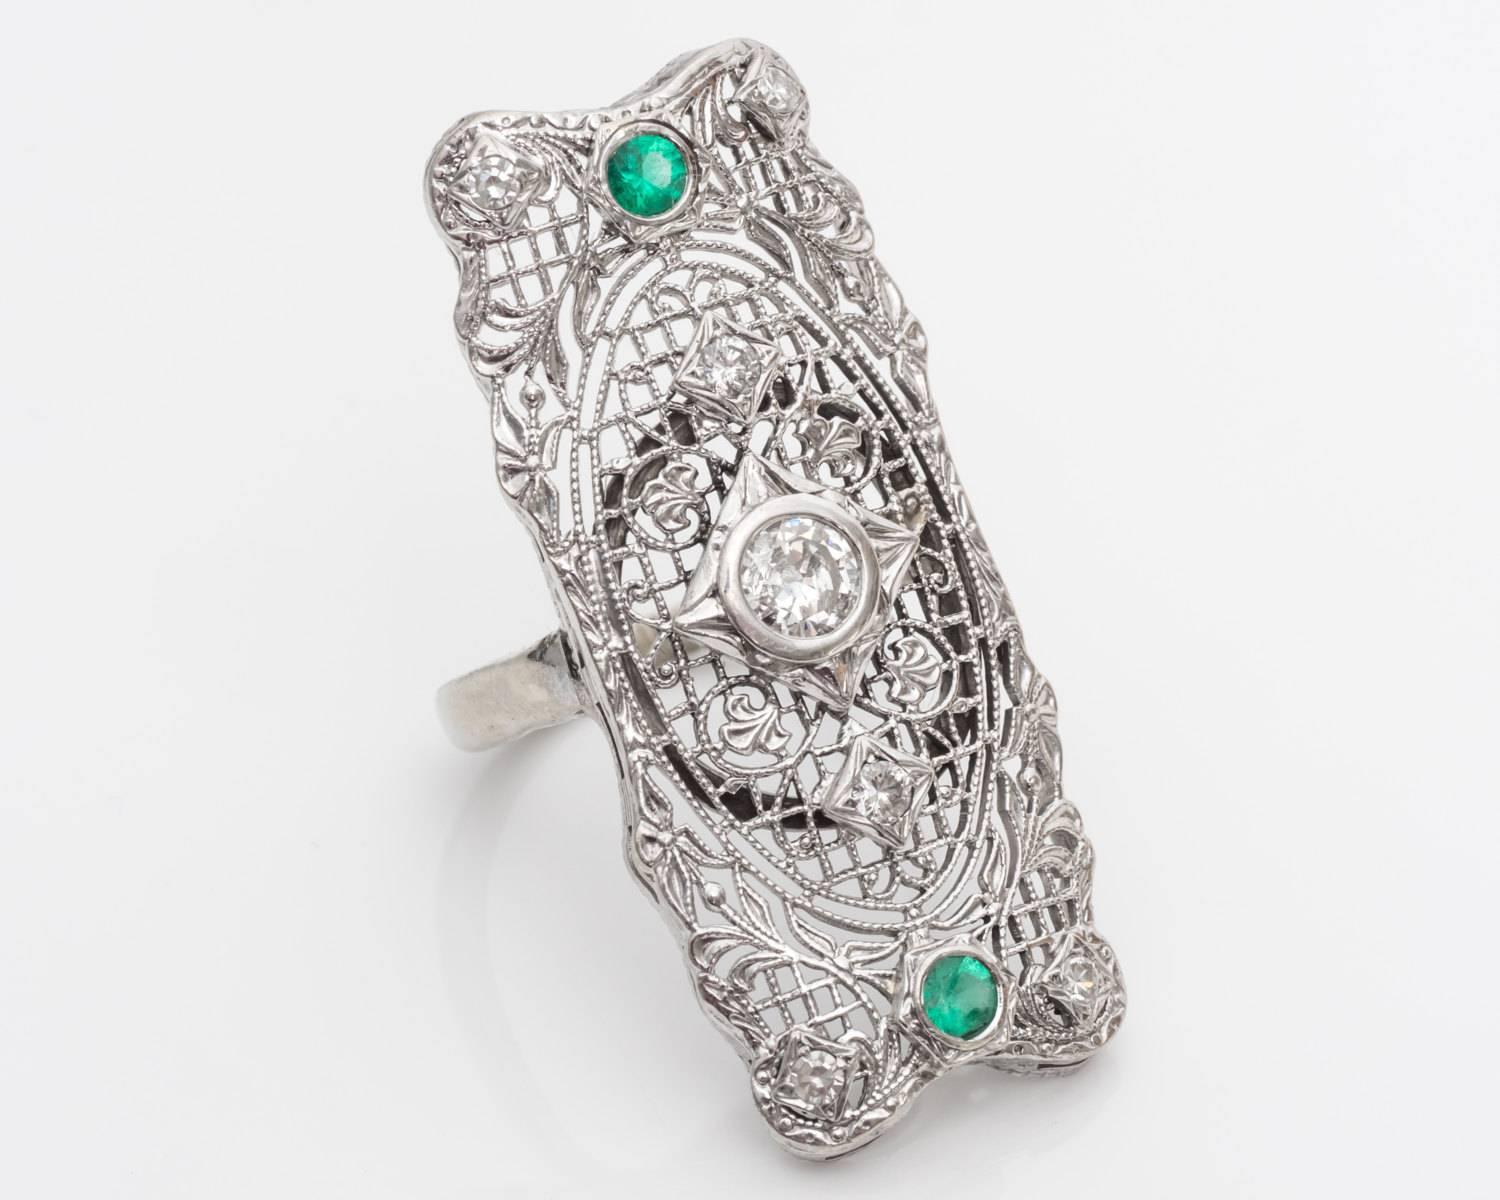 14 Karat White Gold Filigree Shield Ring
Full of Intense and Delicate Filigree Scroll Design 
Features Diamonds and Emeralds
Fits Ring Size 7, Resizable


Center Diamond Details: Transitional Cut round, Weighs 0.33 Carats, G Color, SI1 Clarity,